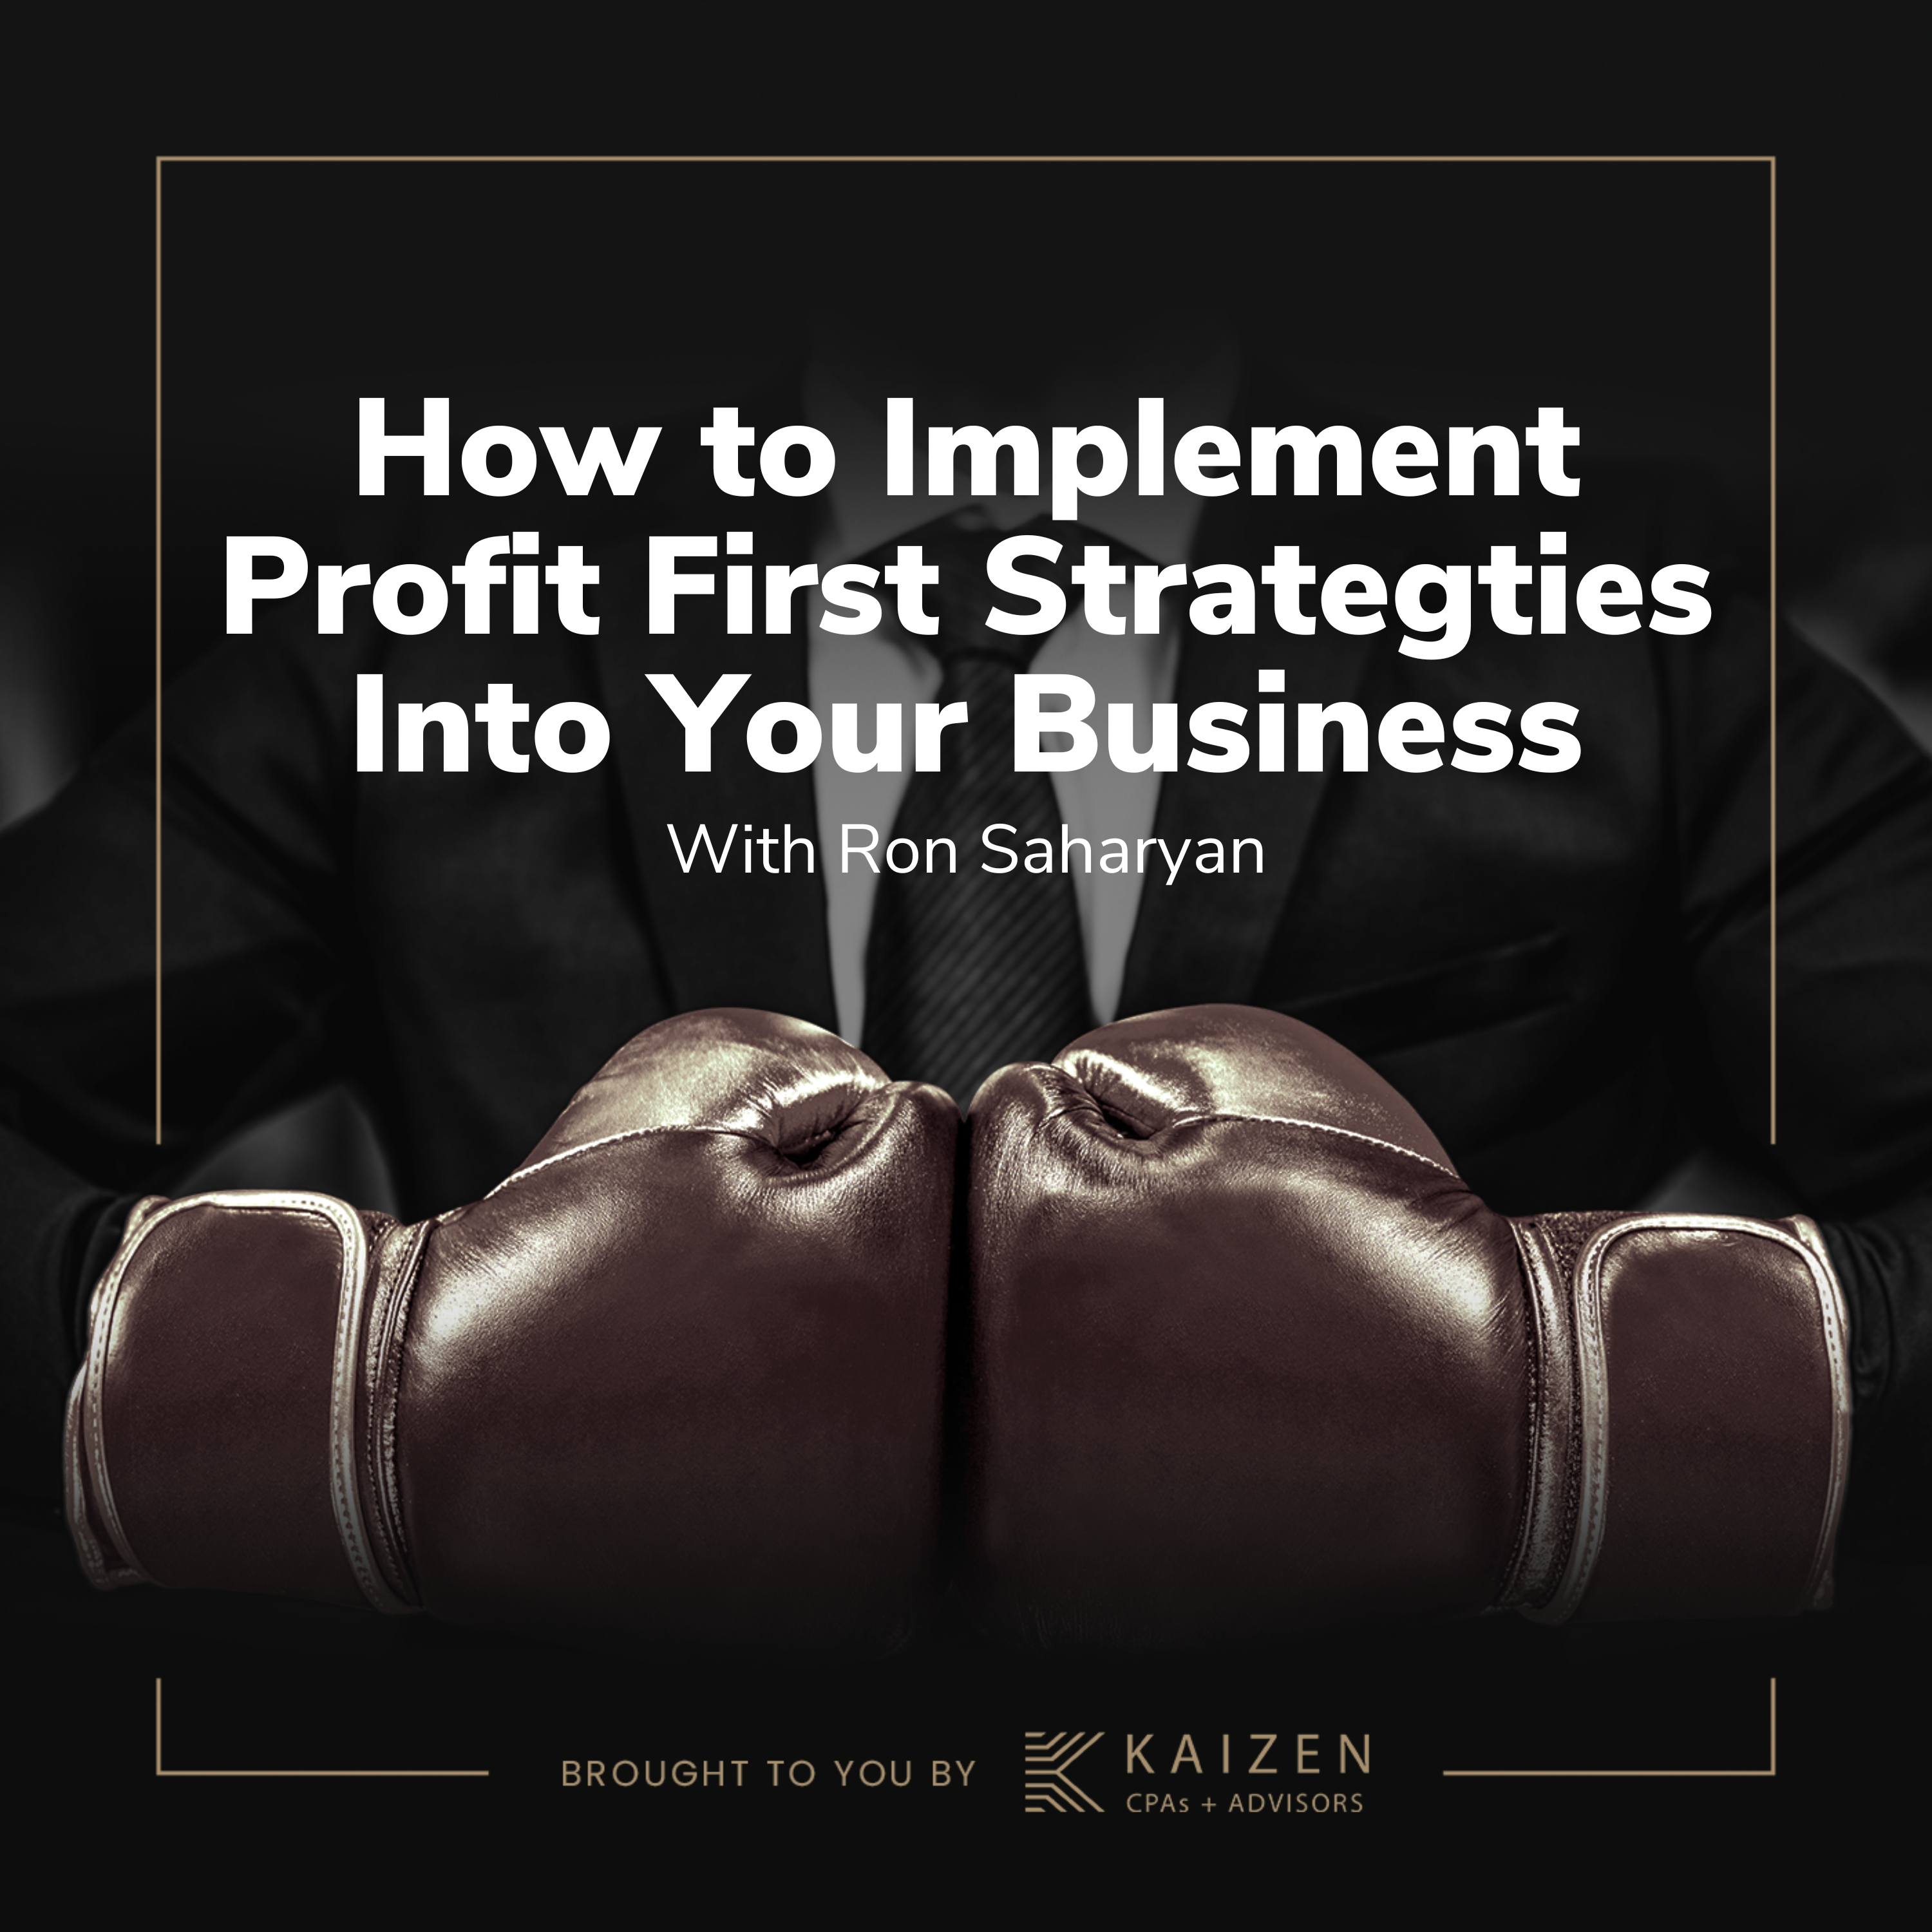 How to implement profit first strategies into your business